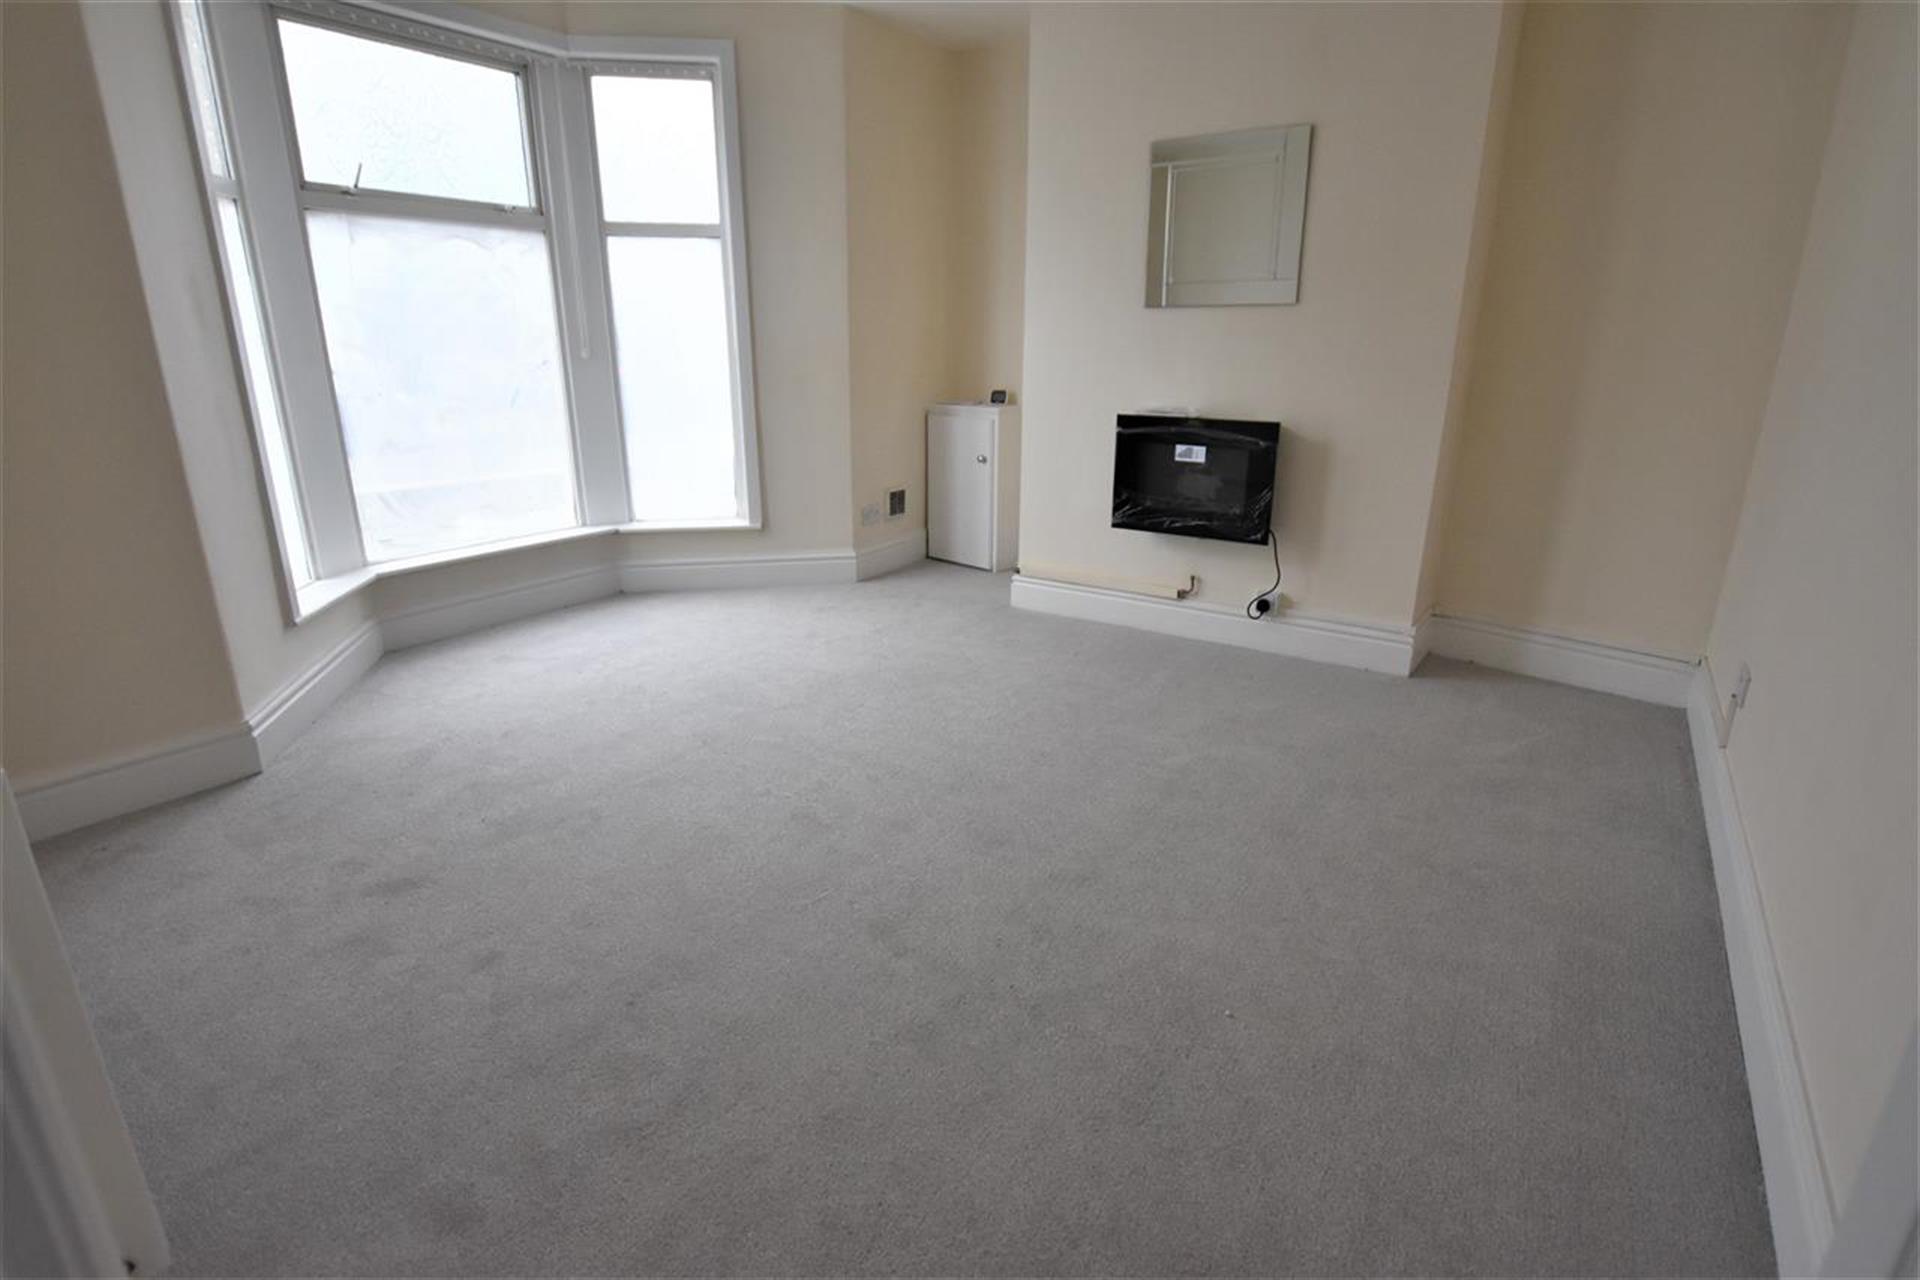 3 Bedroom End Terraced House To Rent - Main Picture